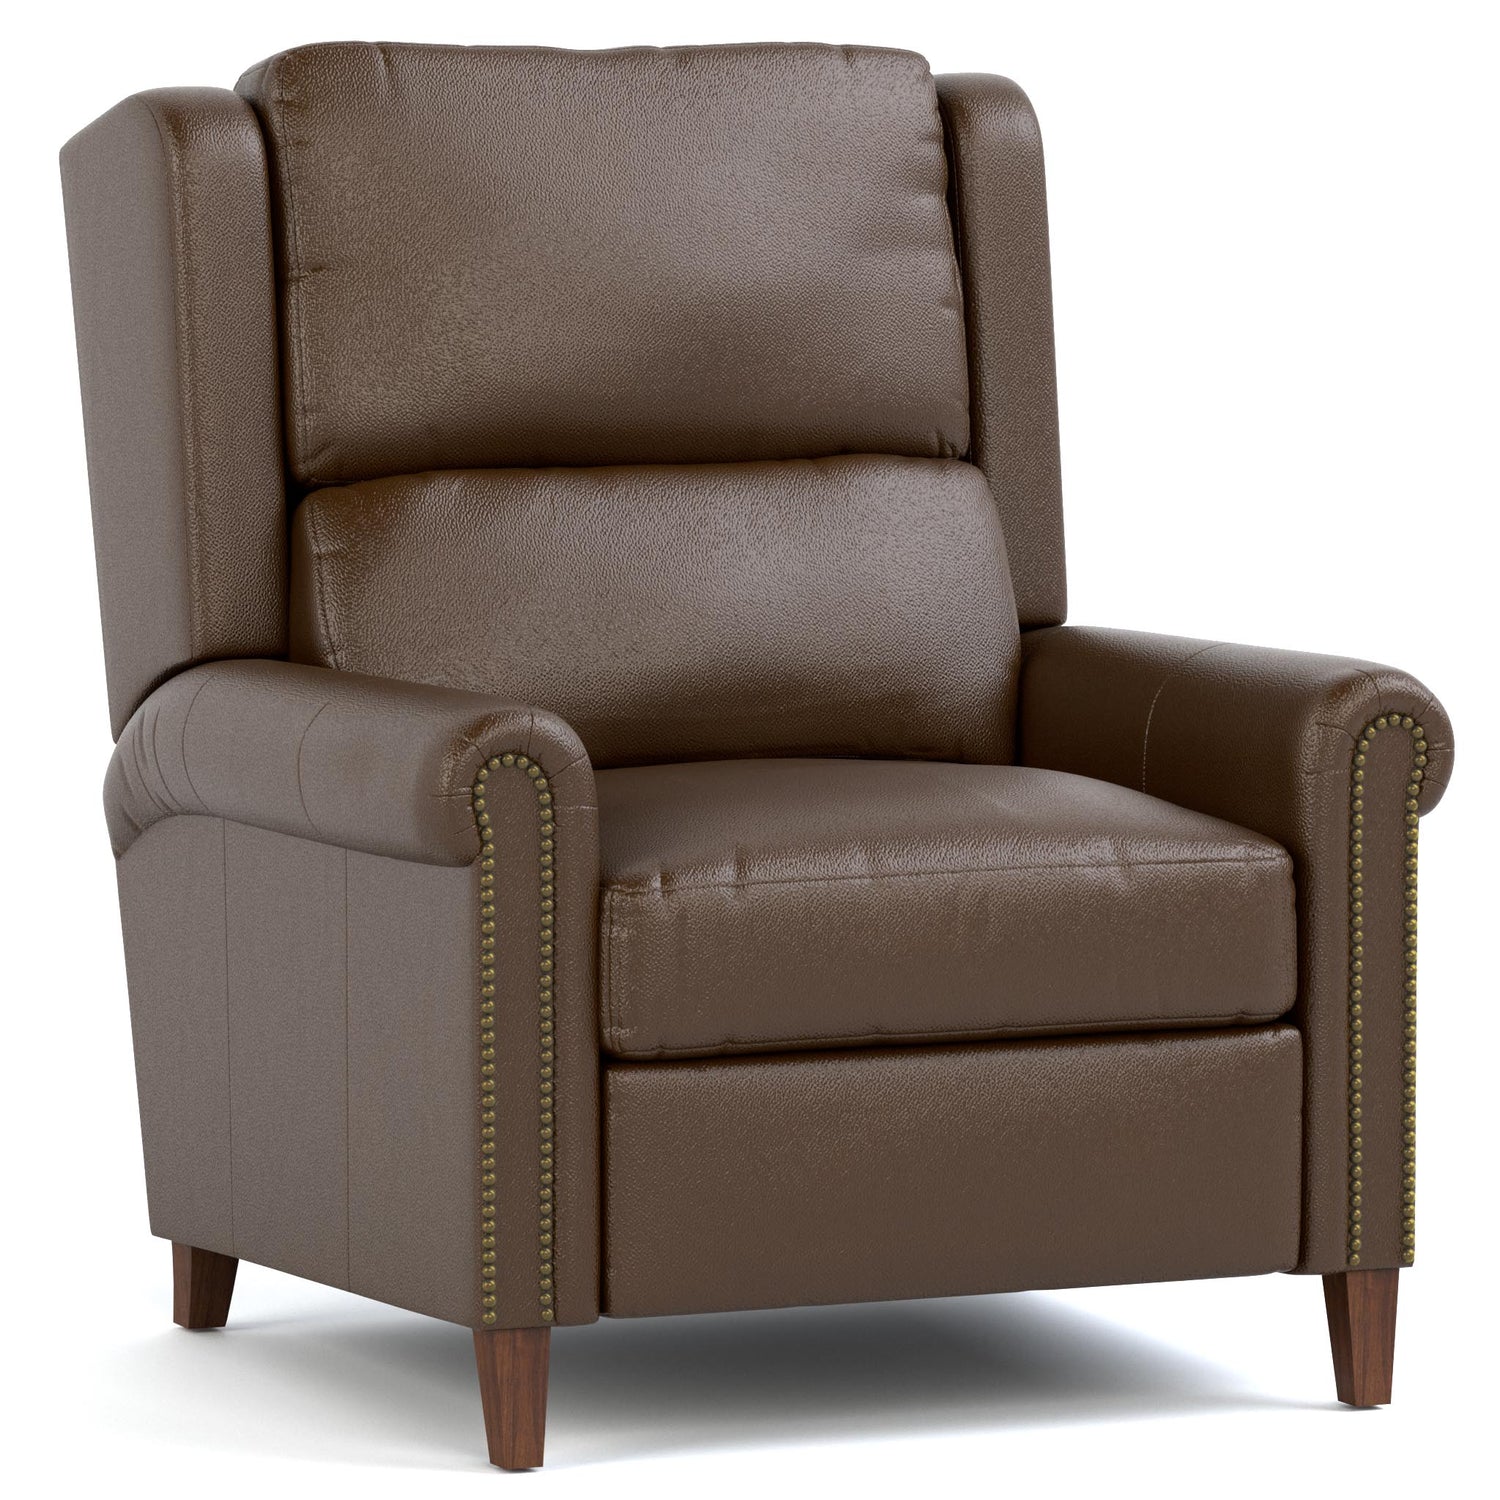 Woodlands Small Roll Arm Power Recliner with Nails Selvano Chestnut Program